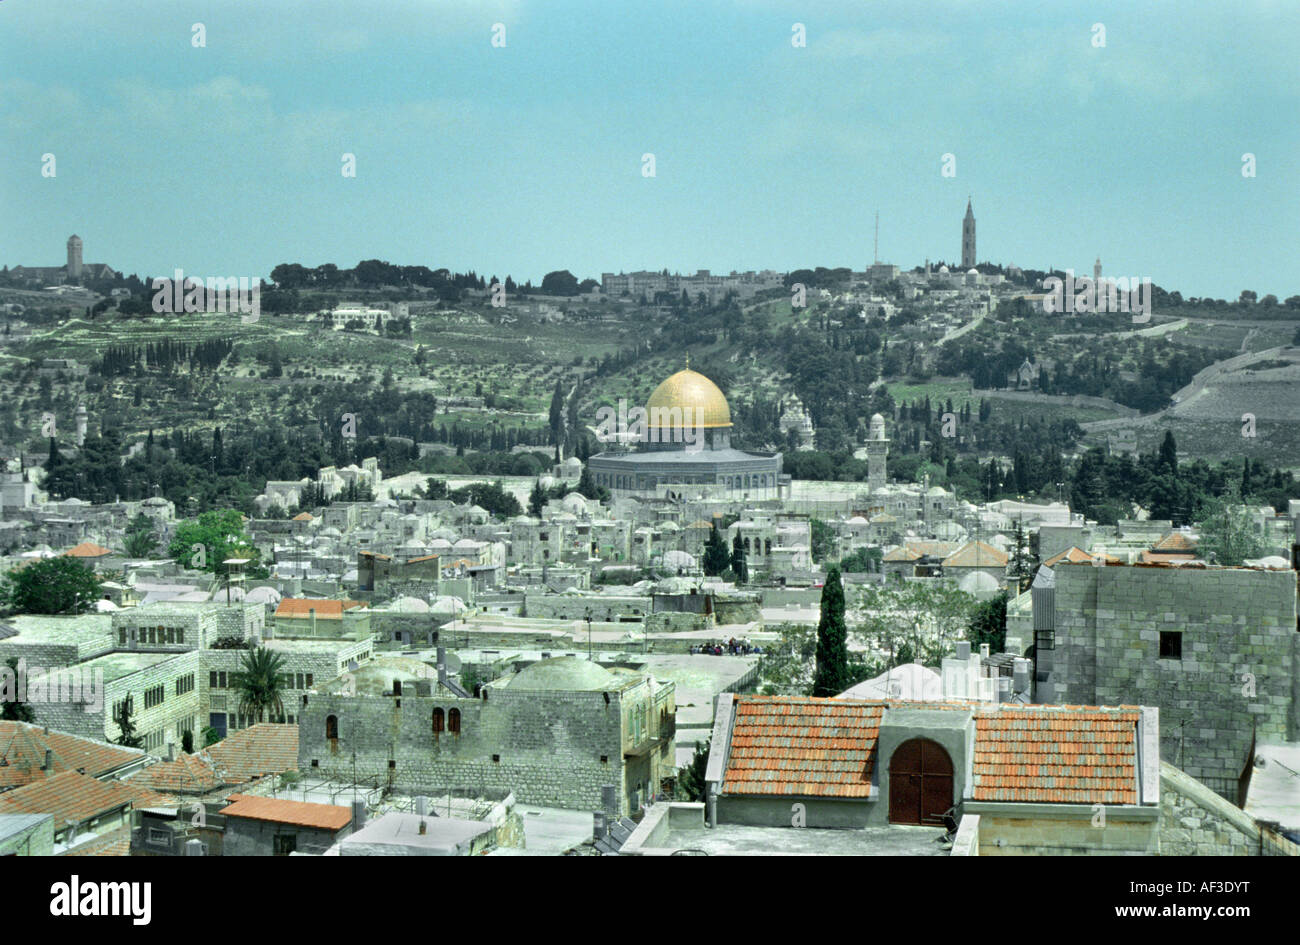 old city and Dome of the Rock, Mount of Olives in background, Israel, Jerusalem Stock Photo